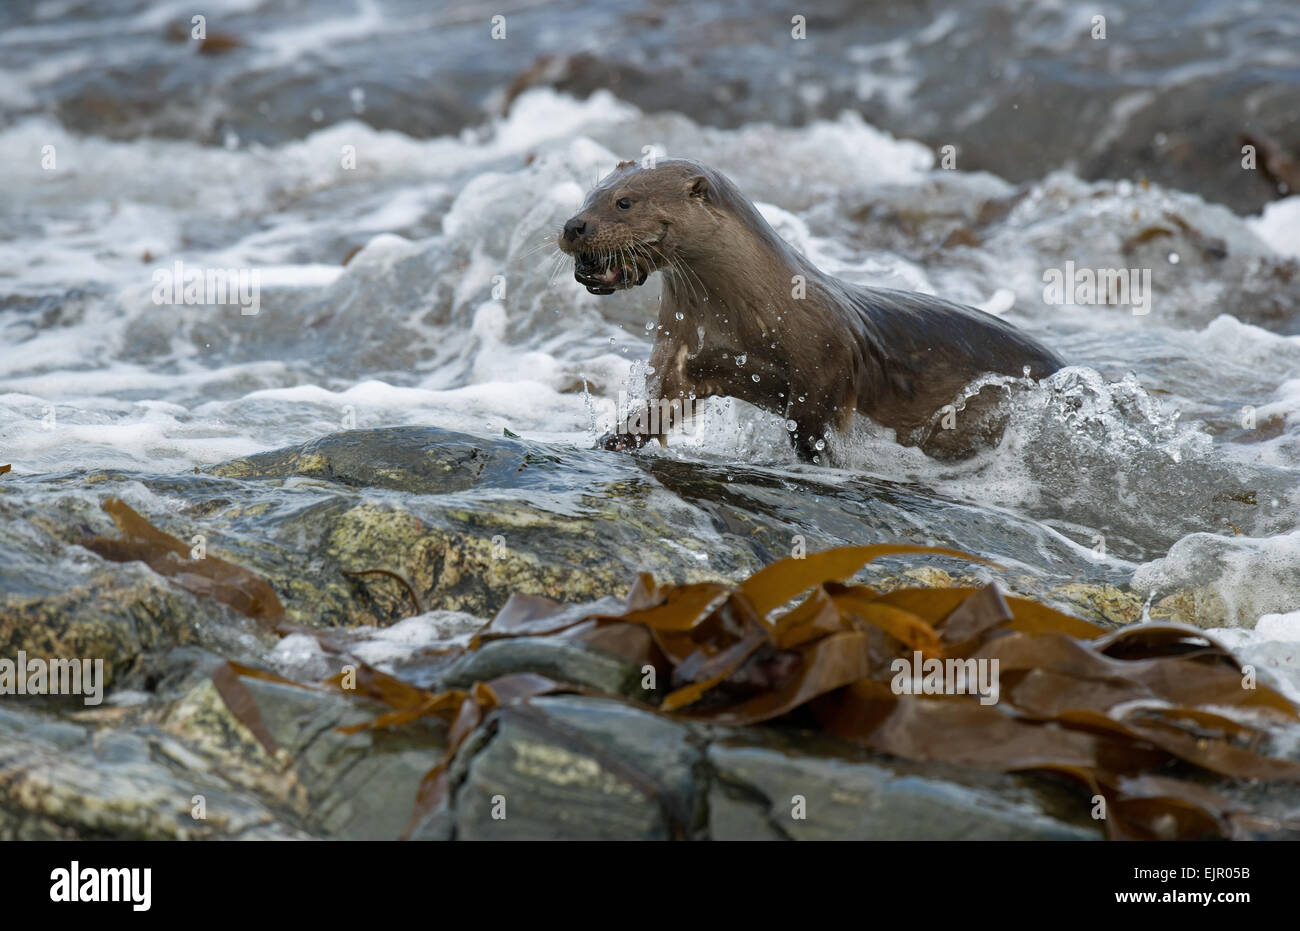 European Otter (Lutra lutra) adult, with crab prey in mouth, emerging from surf on rocky shore, Shetland Islands, Scotland, April Stock Photo